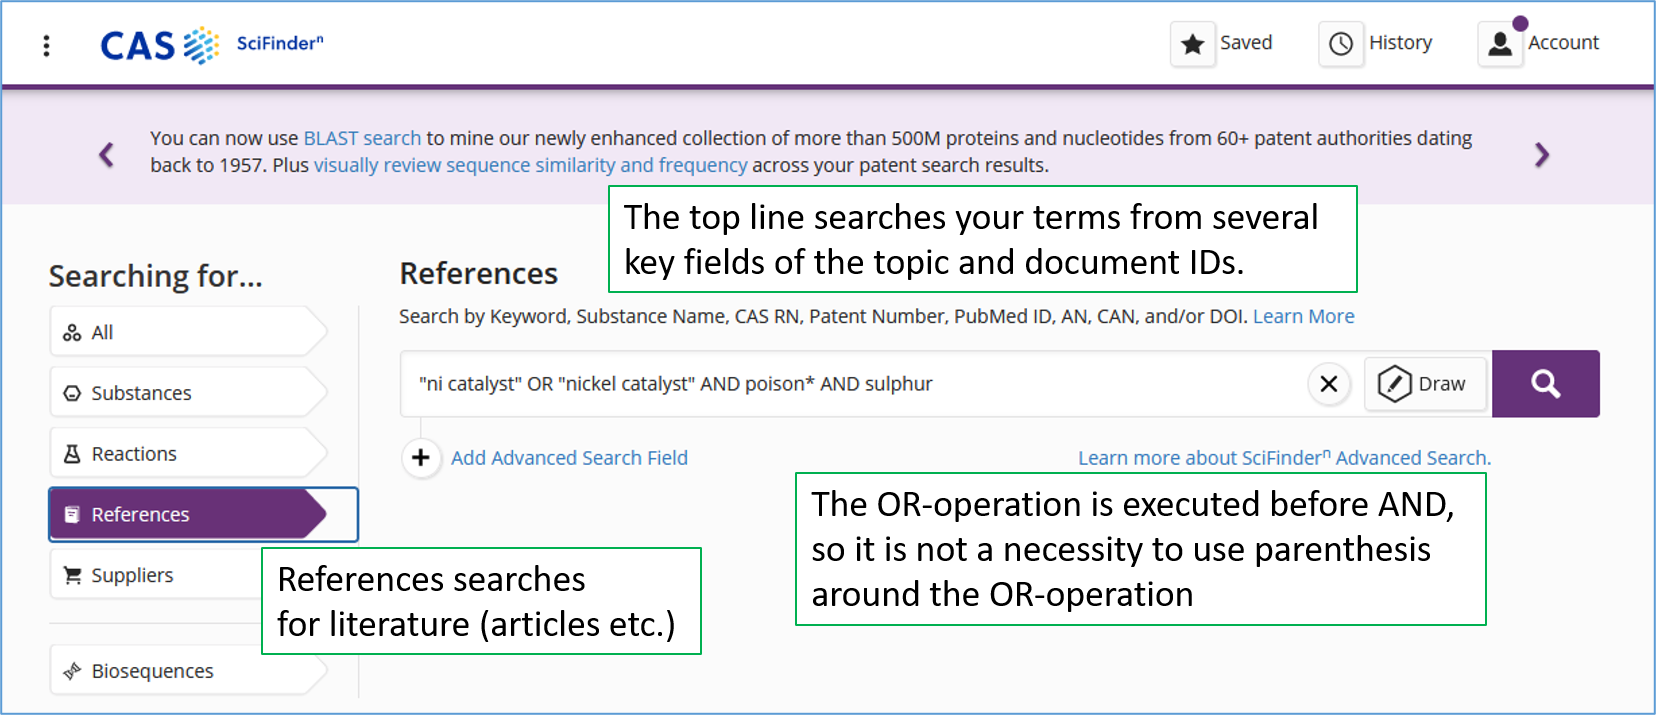 A screen capture of CAS Scifinder-n search page. The query is written in one line: “ni catalyst” or nickel catalyst” and poison and sulphur. The target for the search is ‘references’, which means literature, like articles and books. Explanations: The top line searches your terms from several key fields of the topic and document IDs. The OR-operation is executed before AND, so it is not a necessity to use parenthesis around the OR-operation.